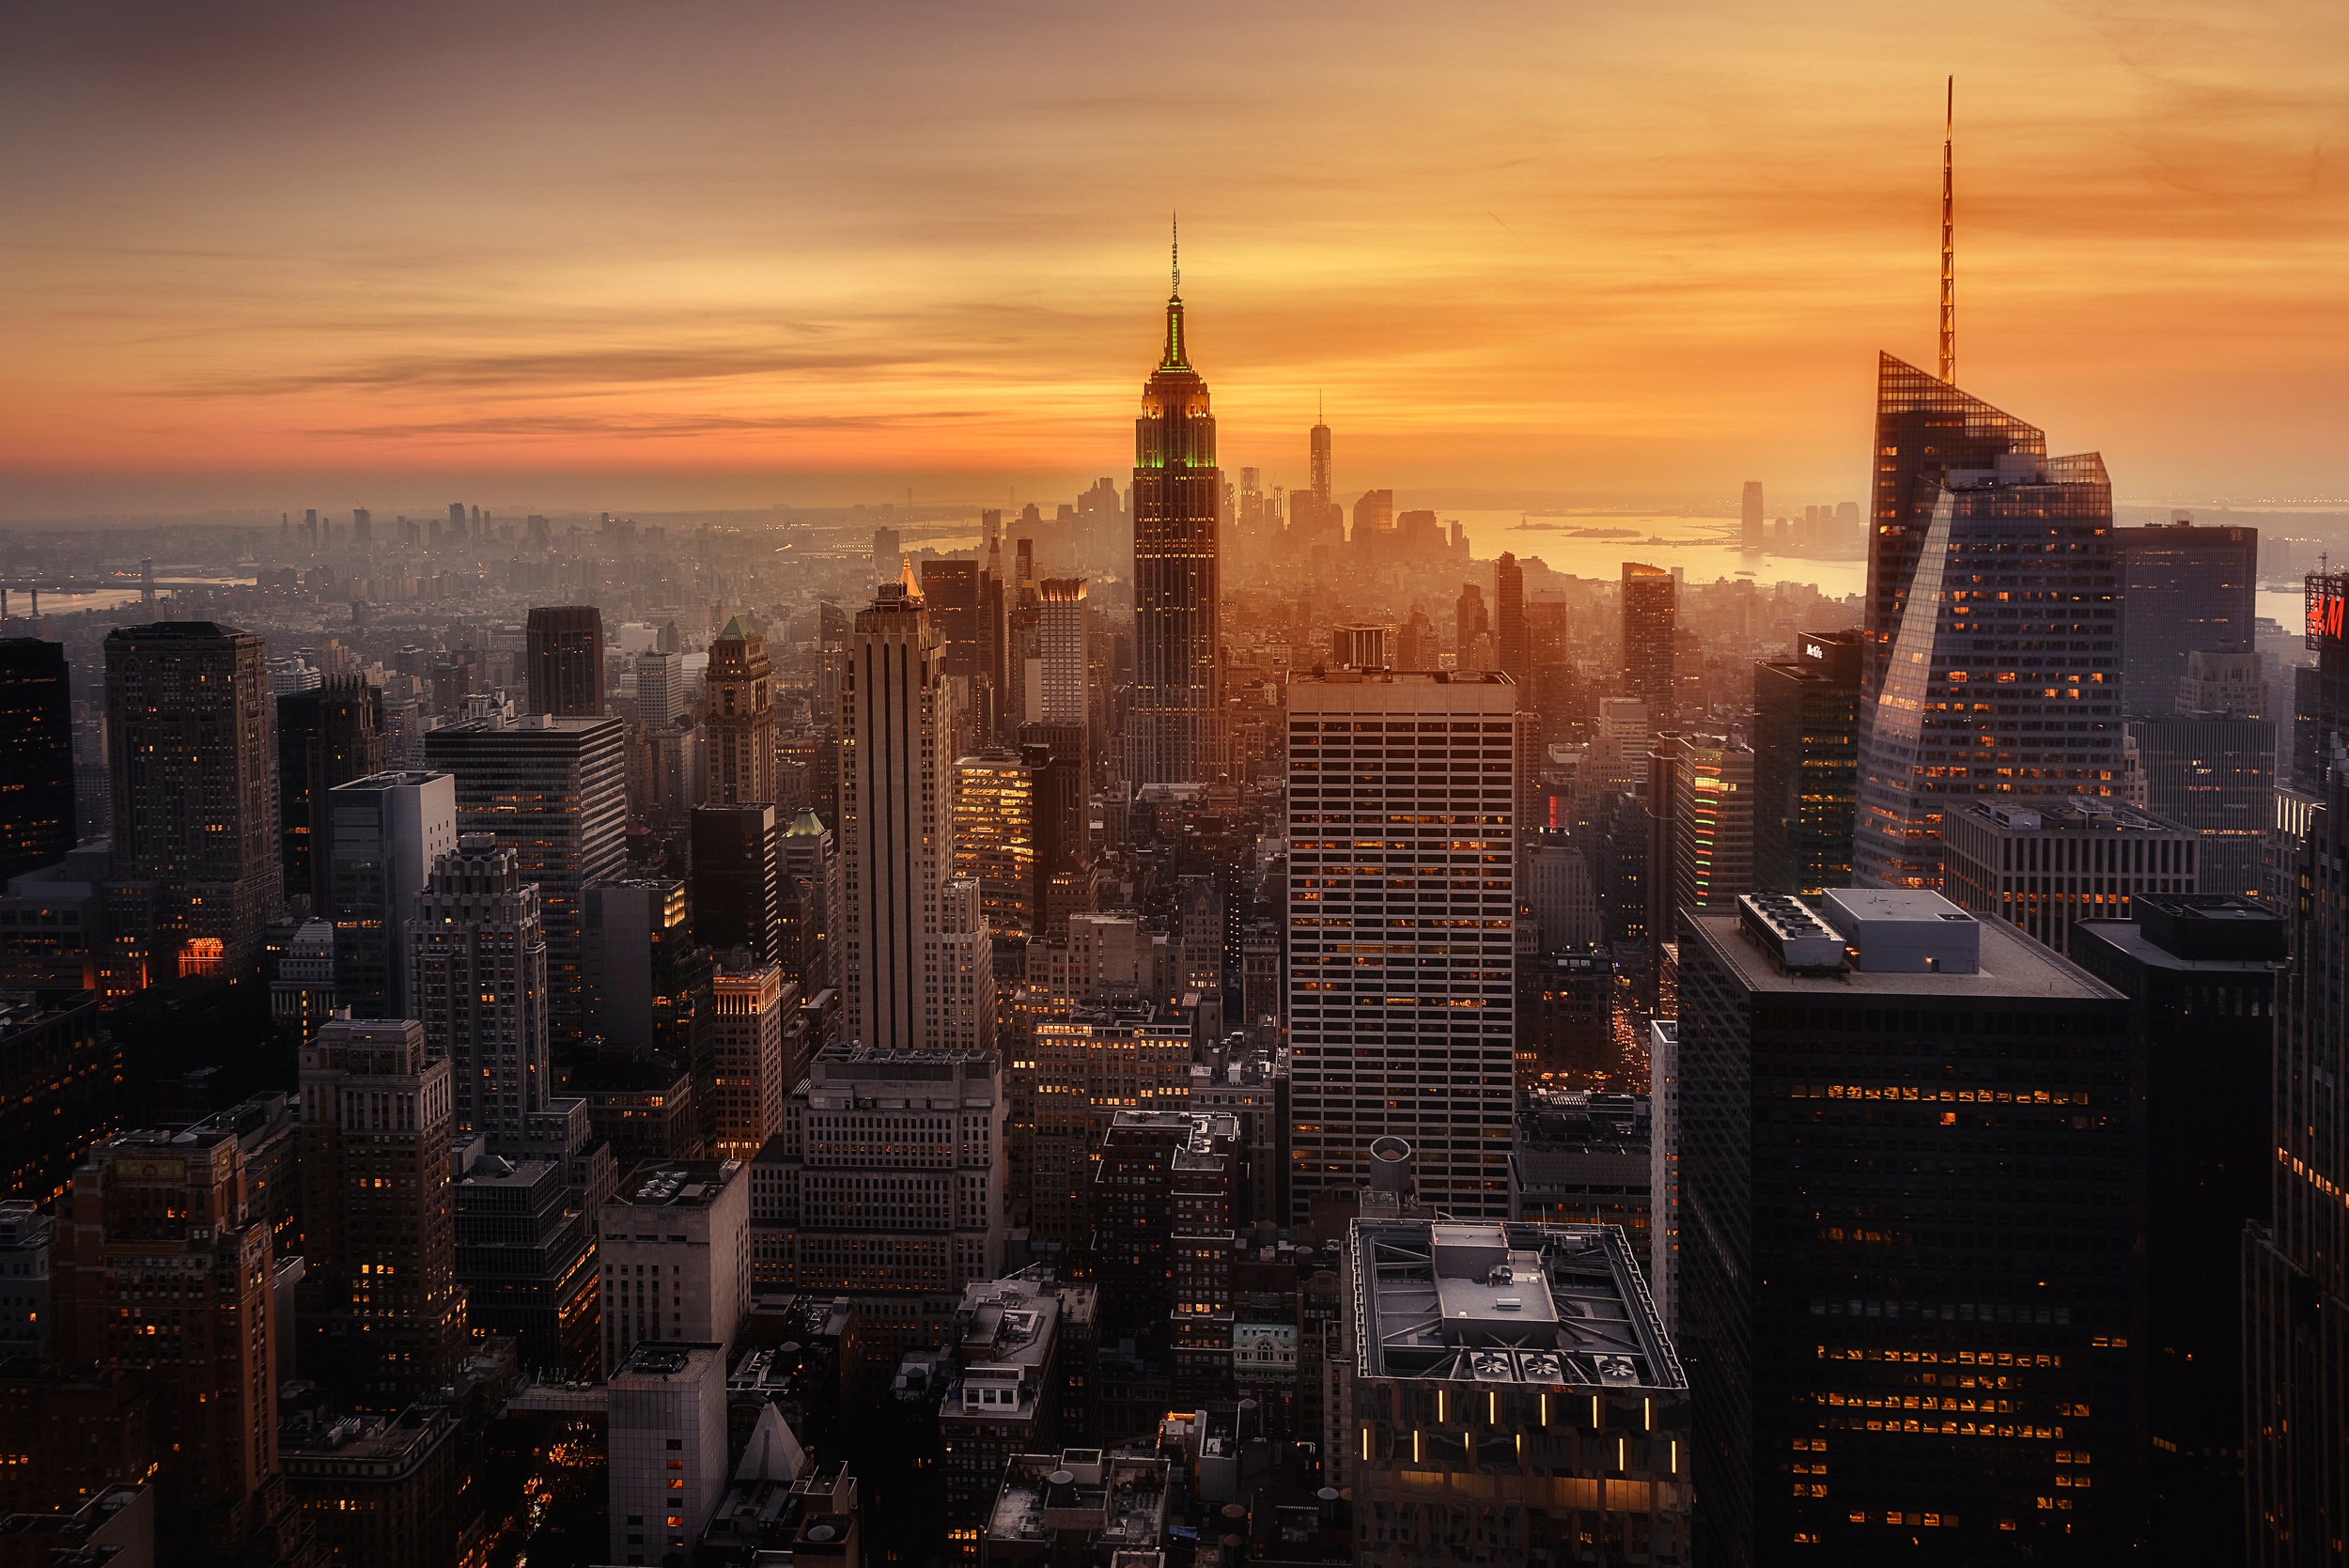 empire state building, usa, man made, new york, building, city, cityscape, skyscraper, sunset, cities